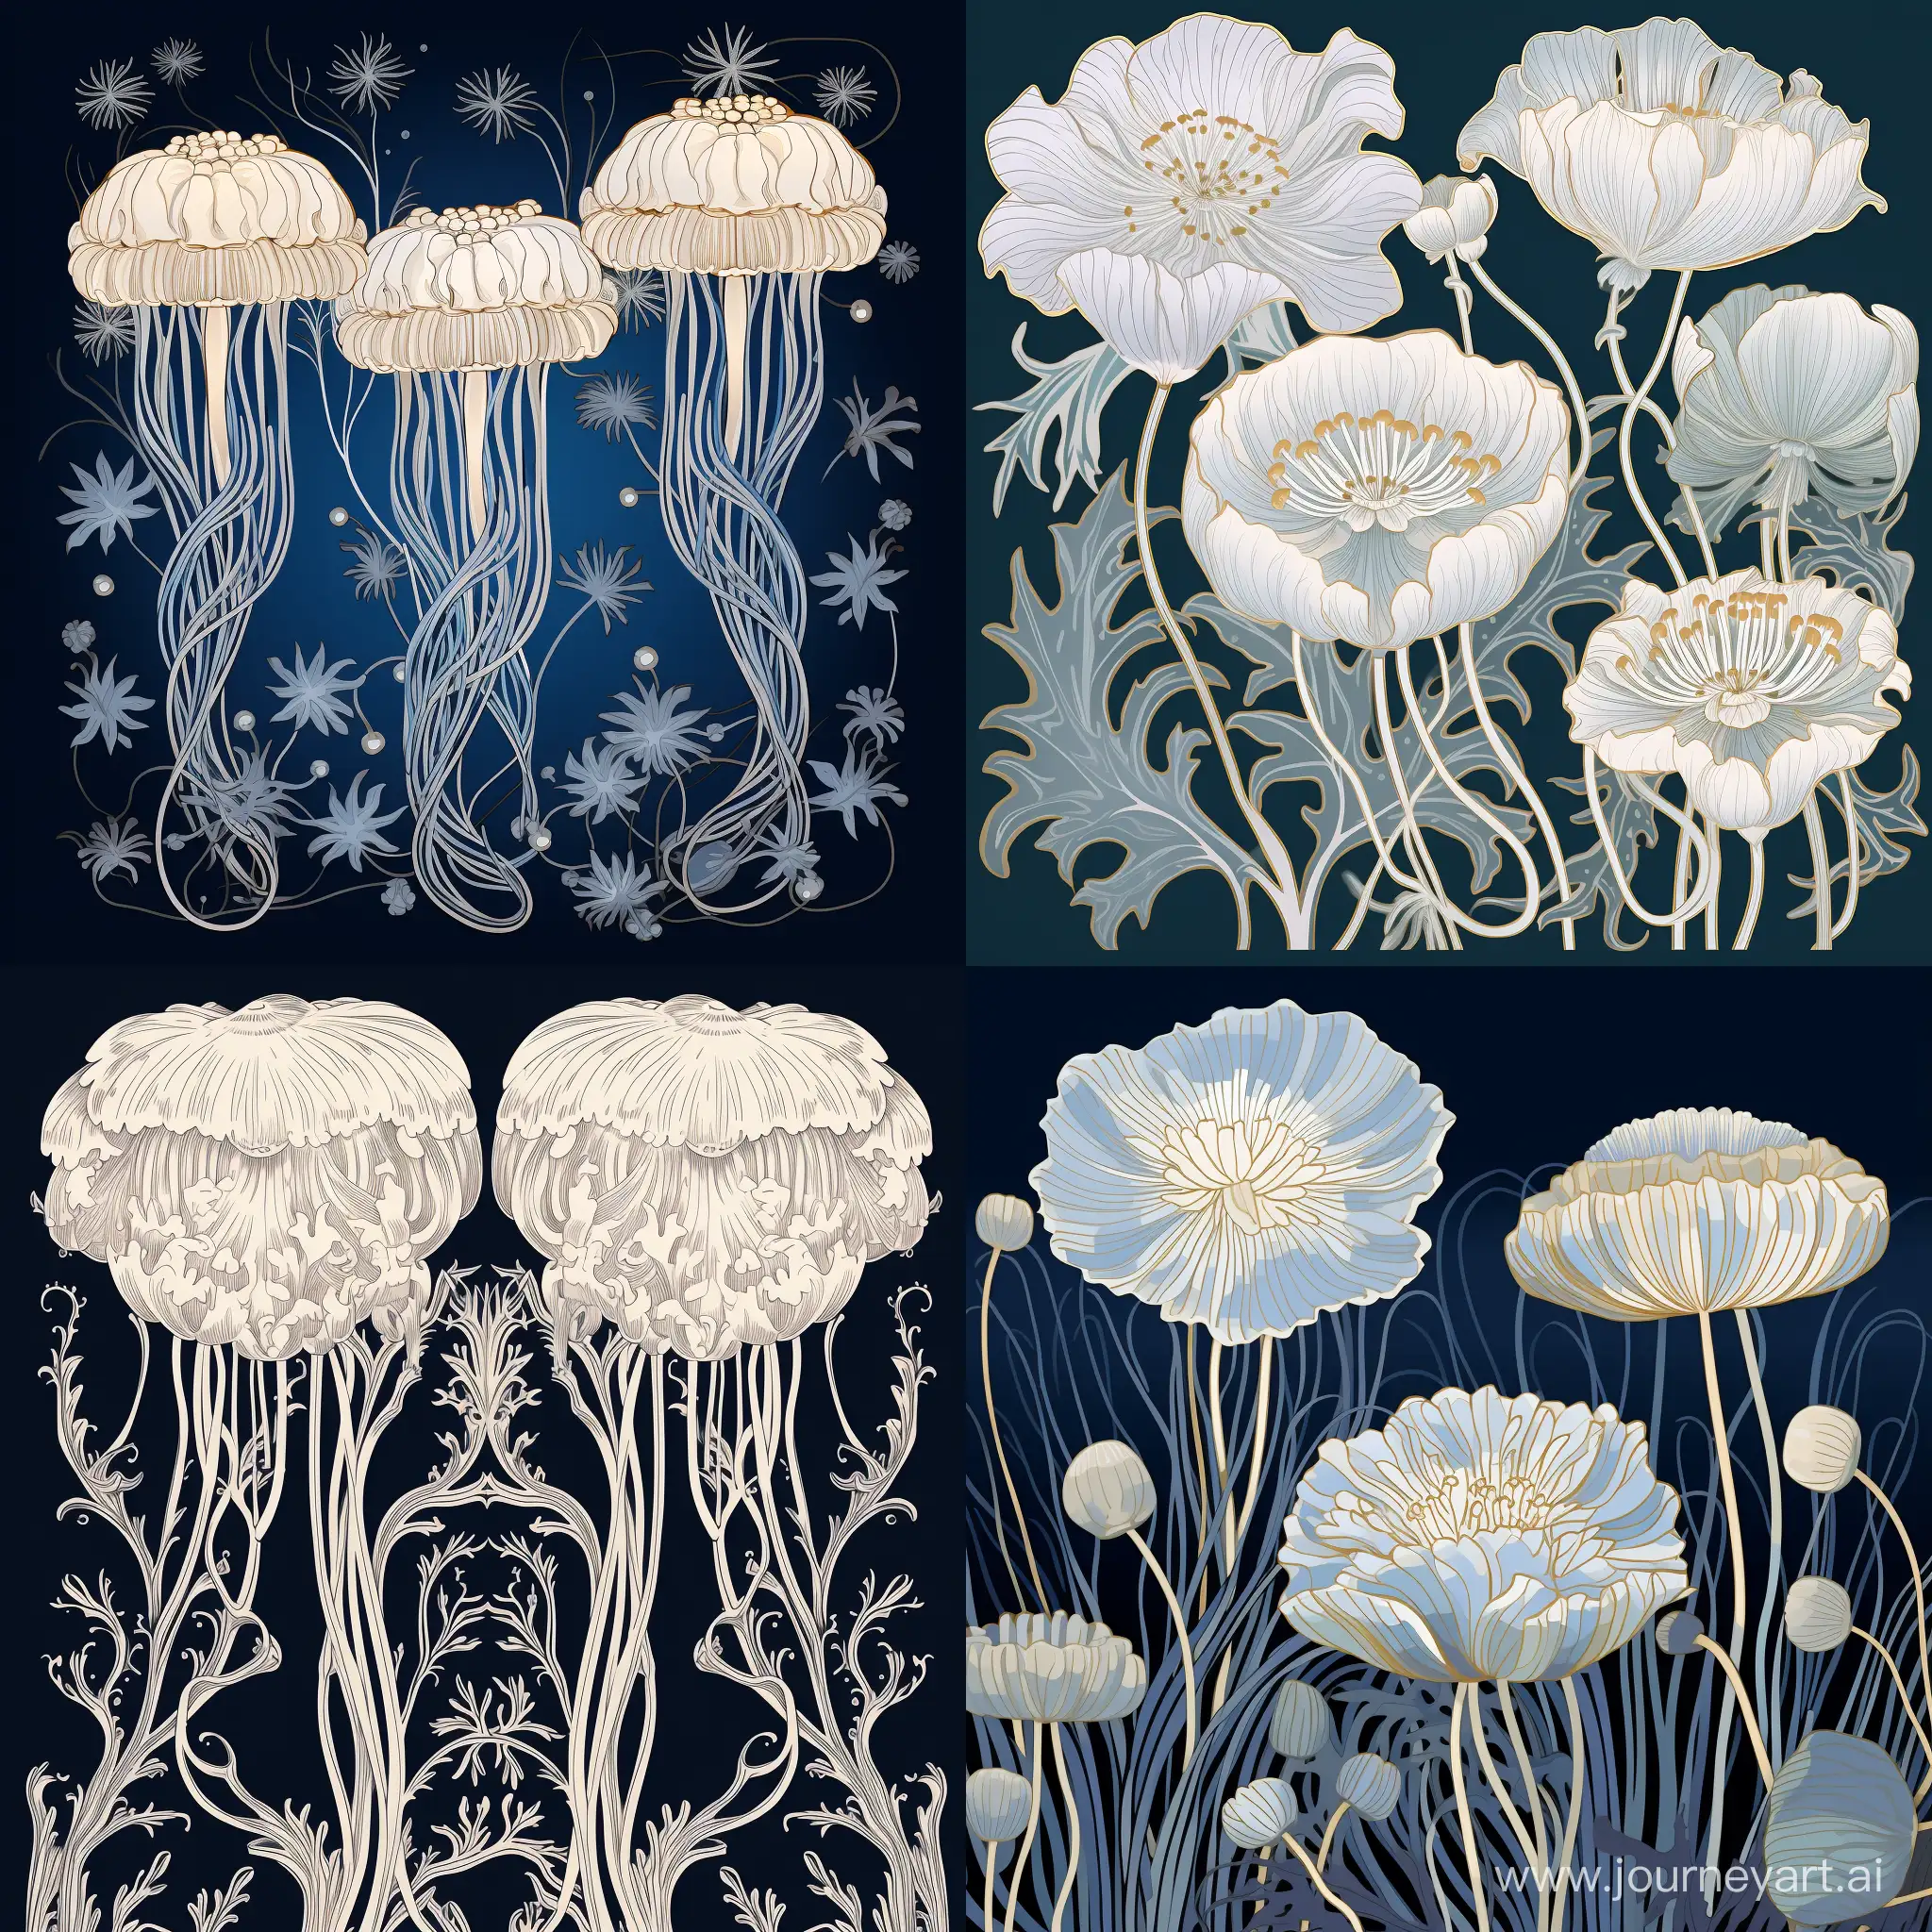 Vintage-Monochromatic-Jellyfish-Painting-Inspired-by-William-Morris